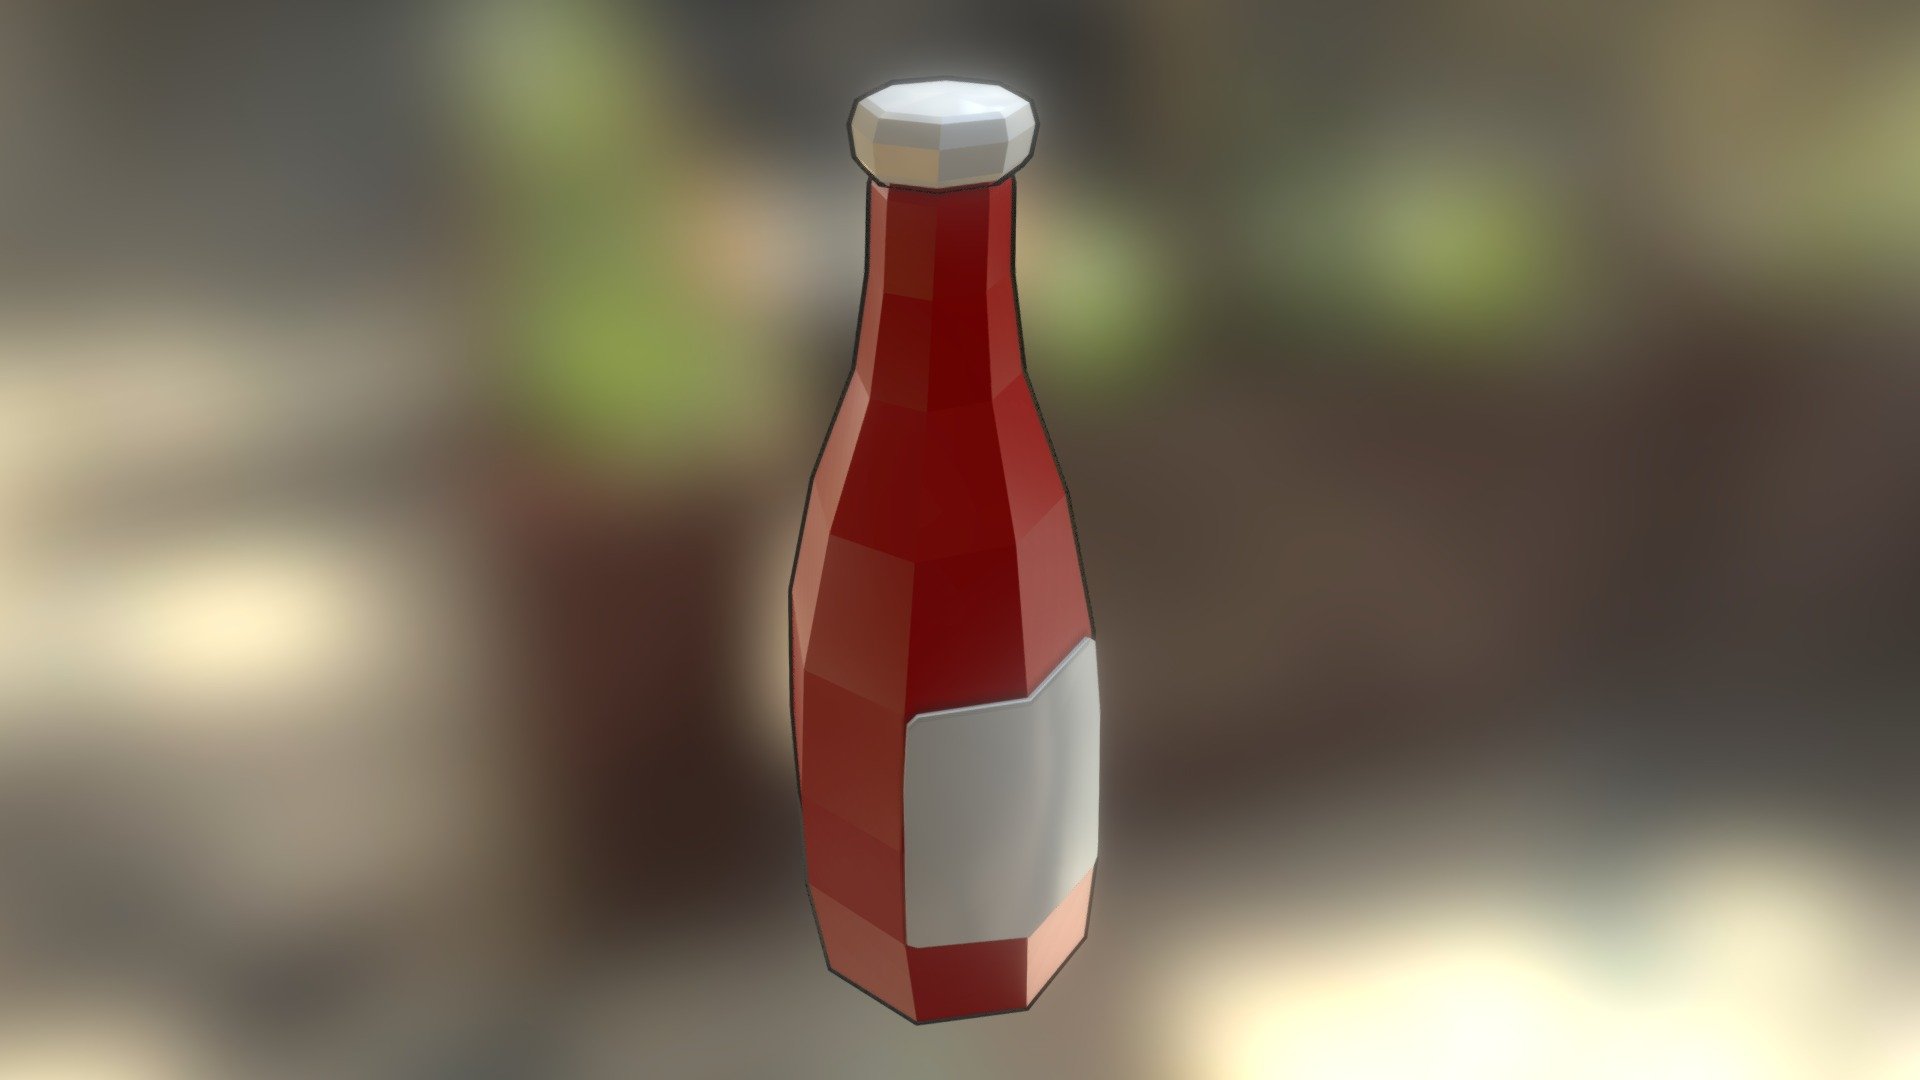 Literally just a bottle of ketchup.